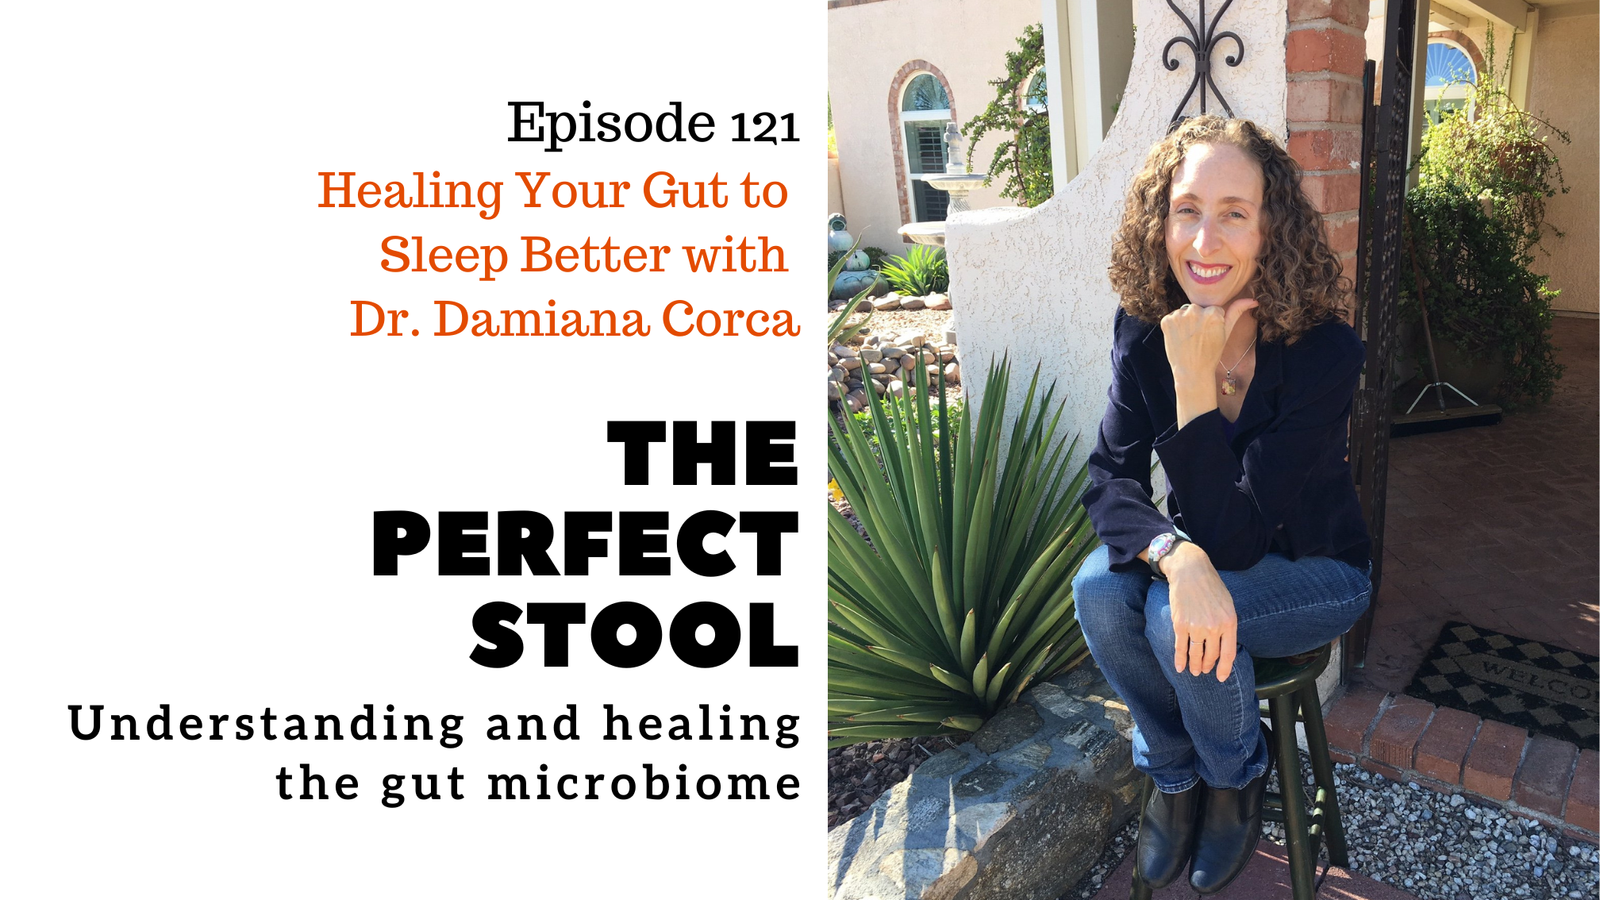 Healing Your Gut to Sleep Better with Dr. Damiana Corca